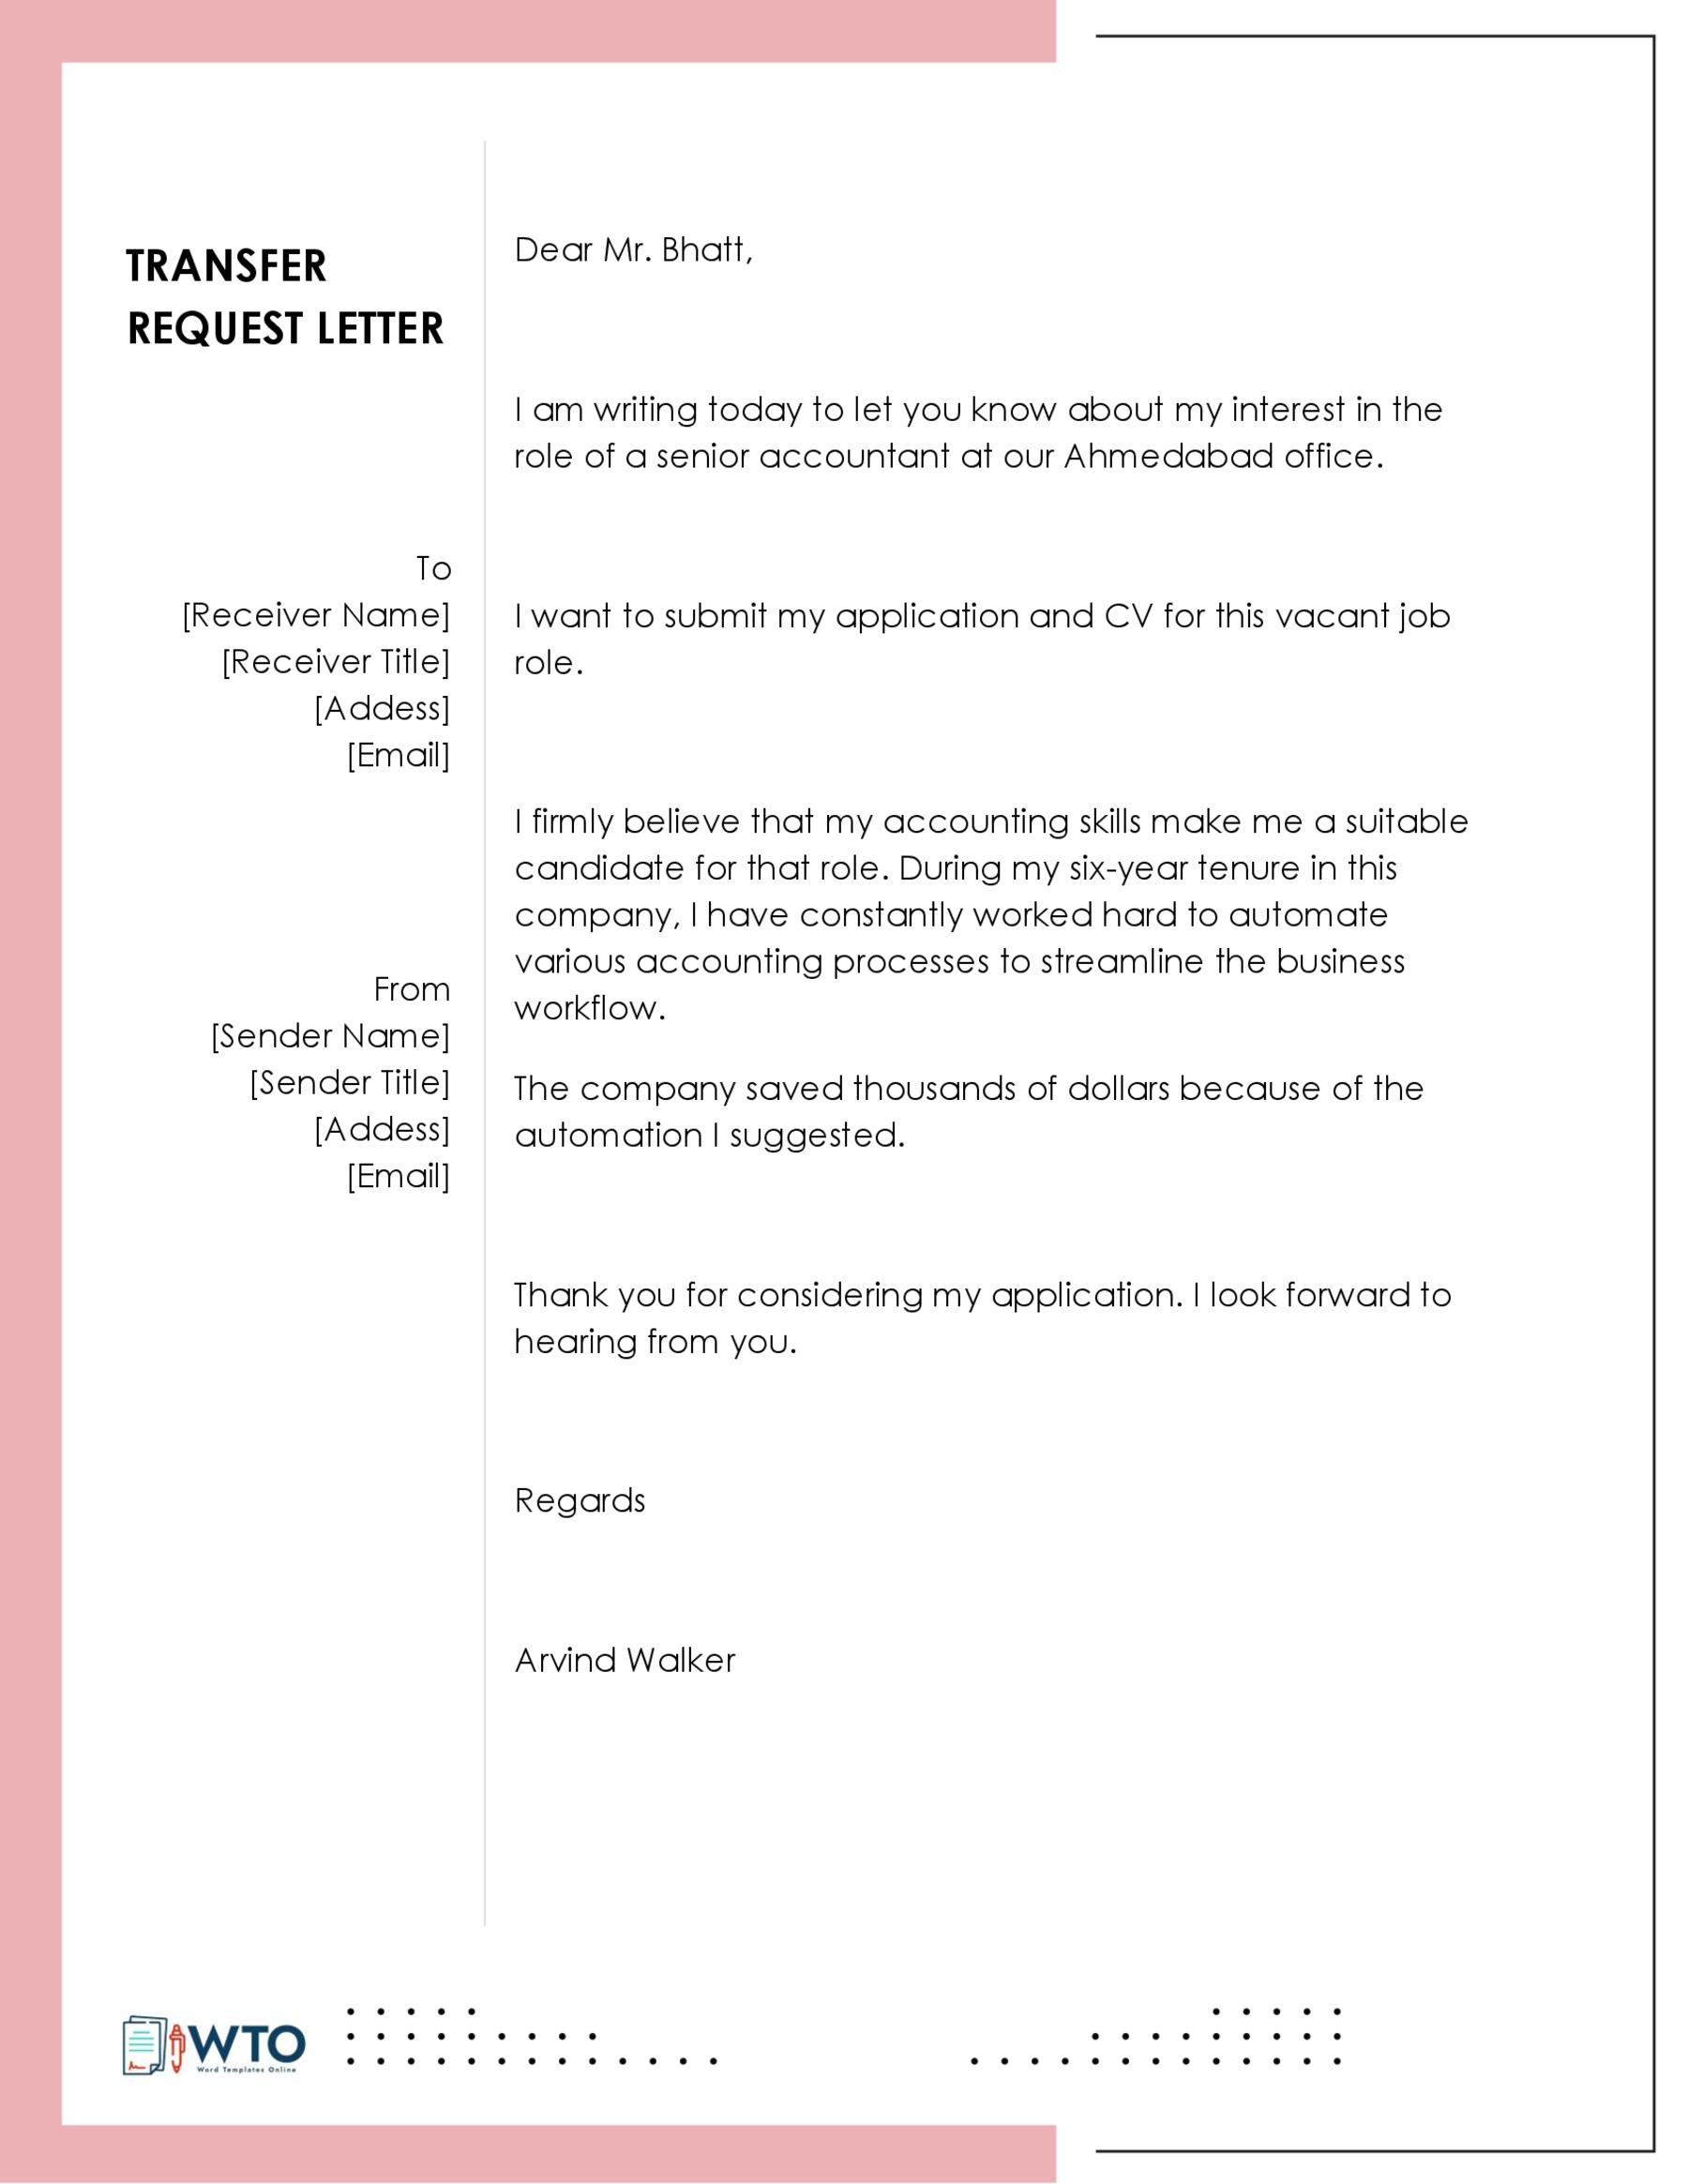 Free Editable Transfer Request Letter Sample 09 in Word Format